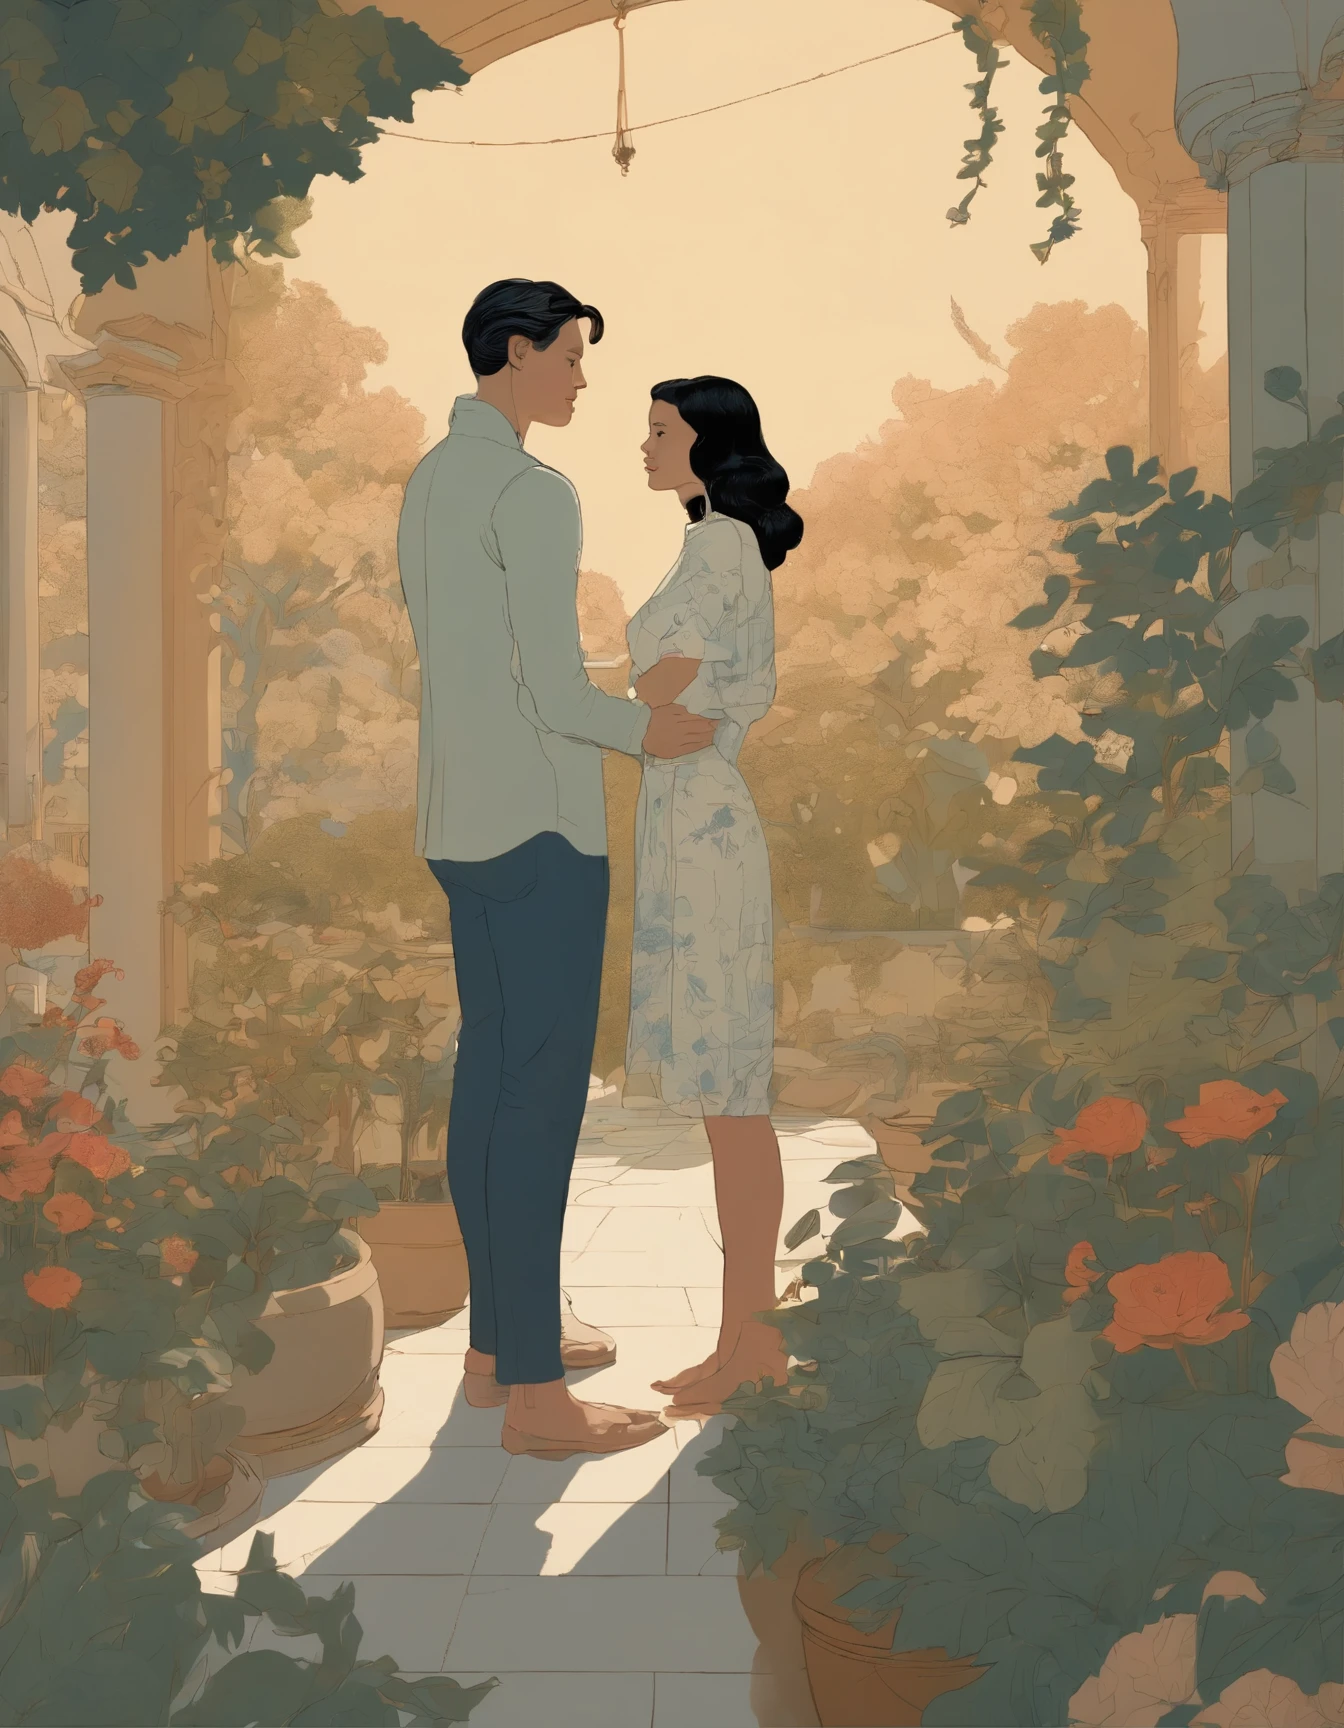 illustration of a woman and a man standing in a garden, concept art by James Jean, trending on pixiv, art nouveau, botticelli and victo ngai, laurie greasley and james jean, james jean marc, james jean art, jordan grimmer and james jean, james jean and victo ngai, brittney lee